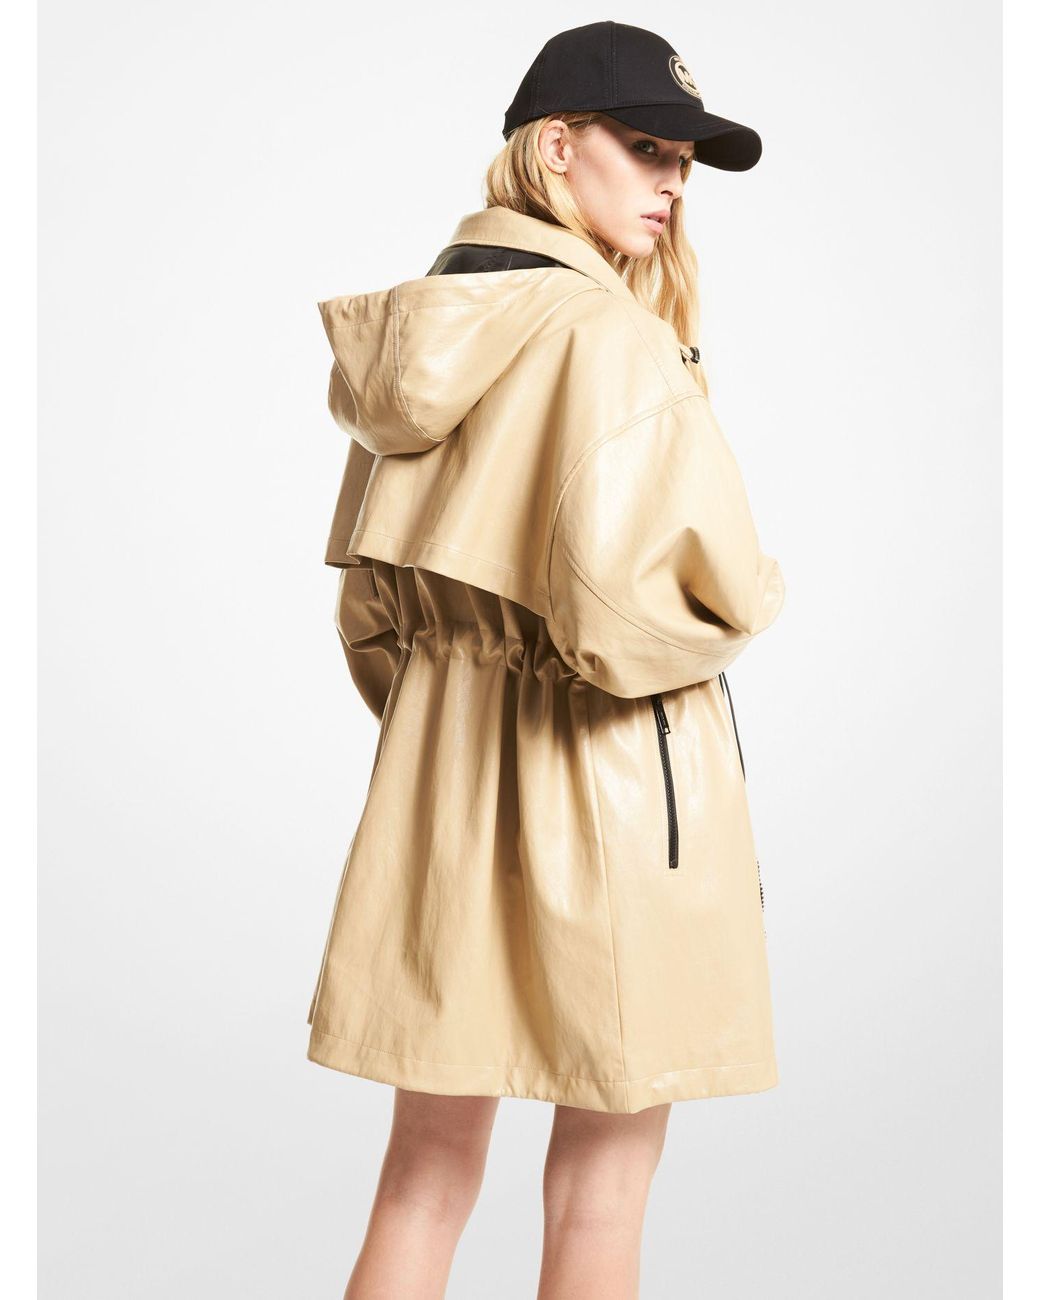 Michael Kors Faux Leather Anorak in Natural | Lyst